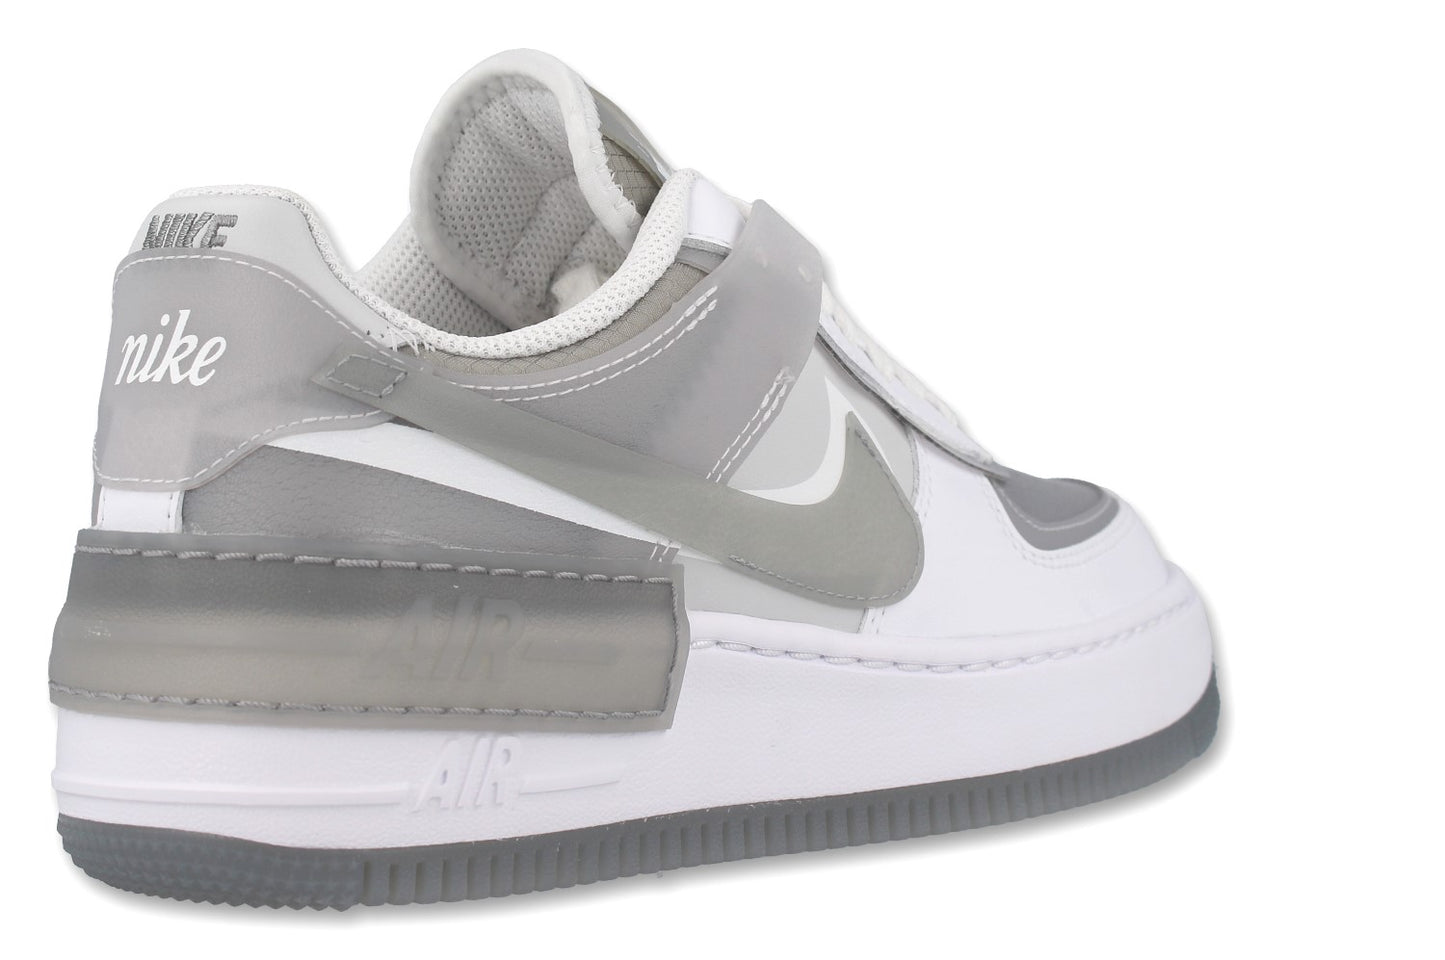 WMNS Air Force 1 Shadow